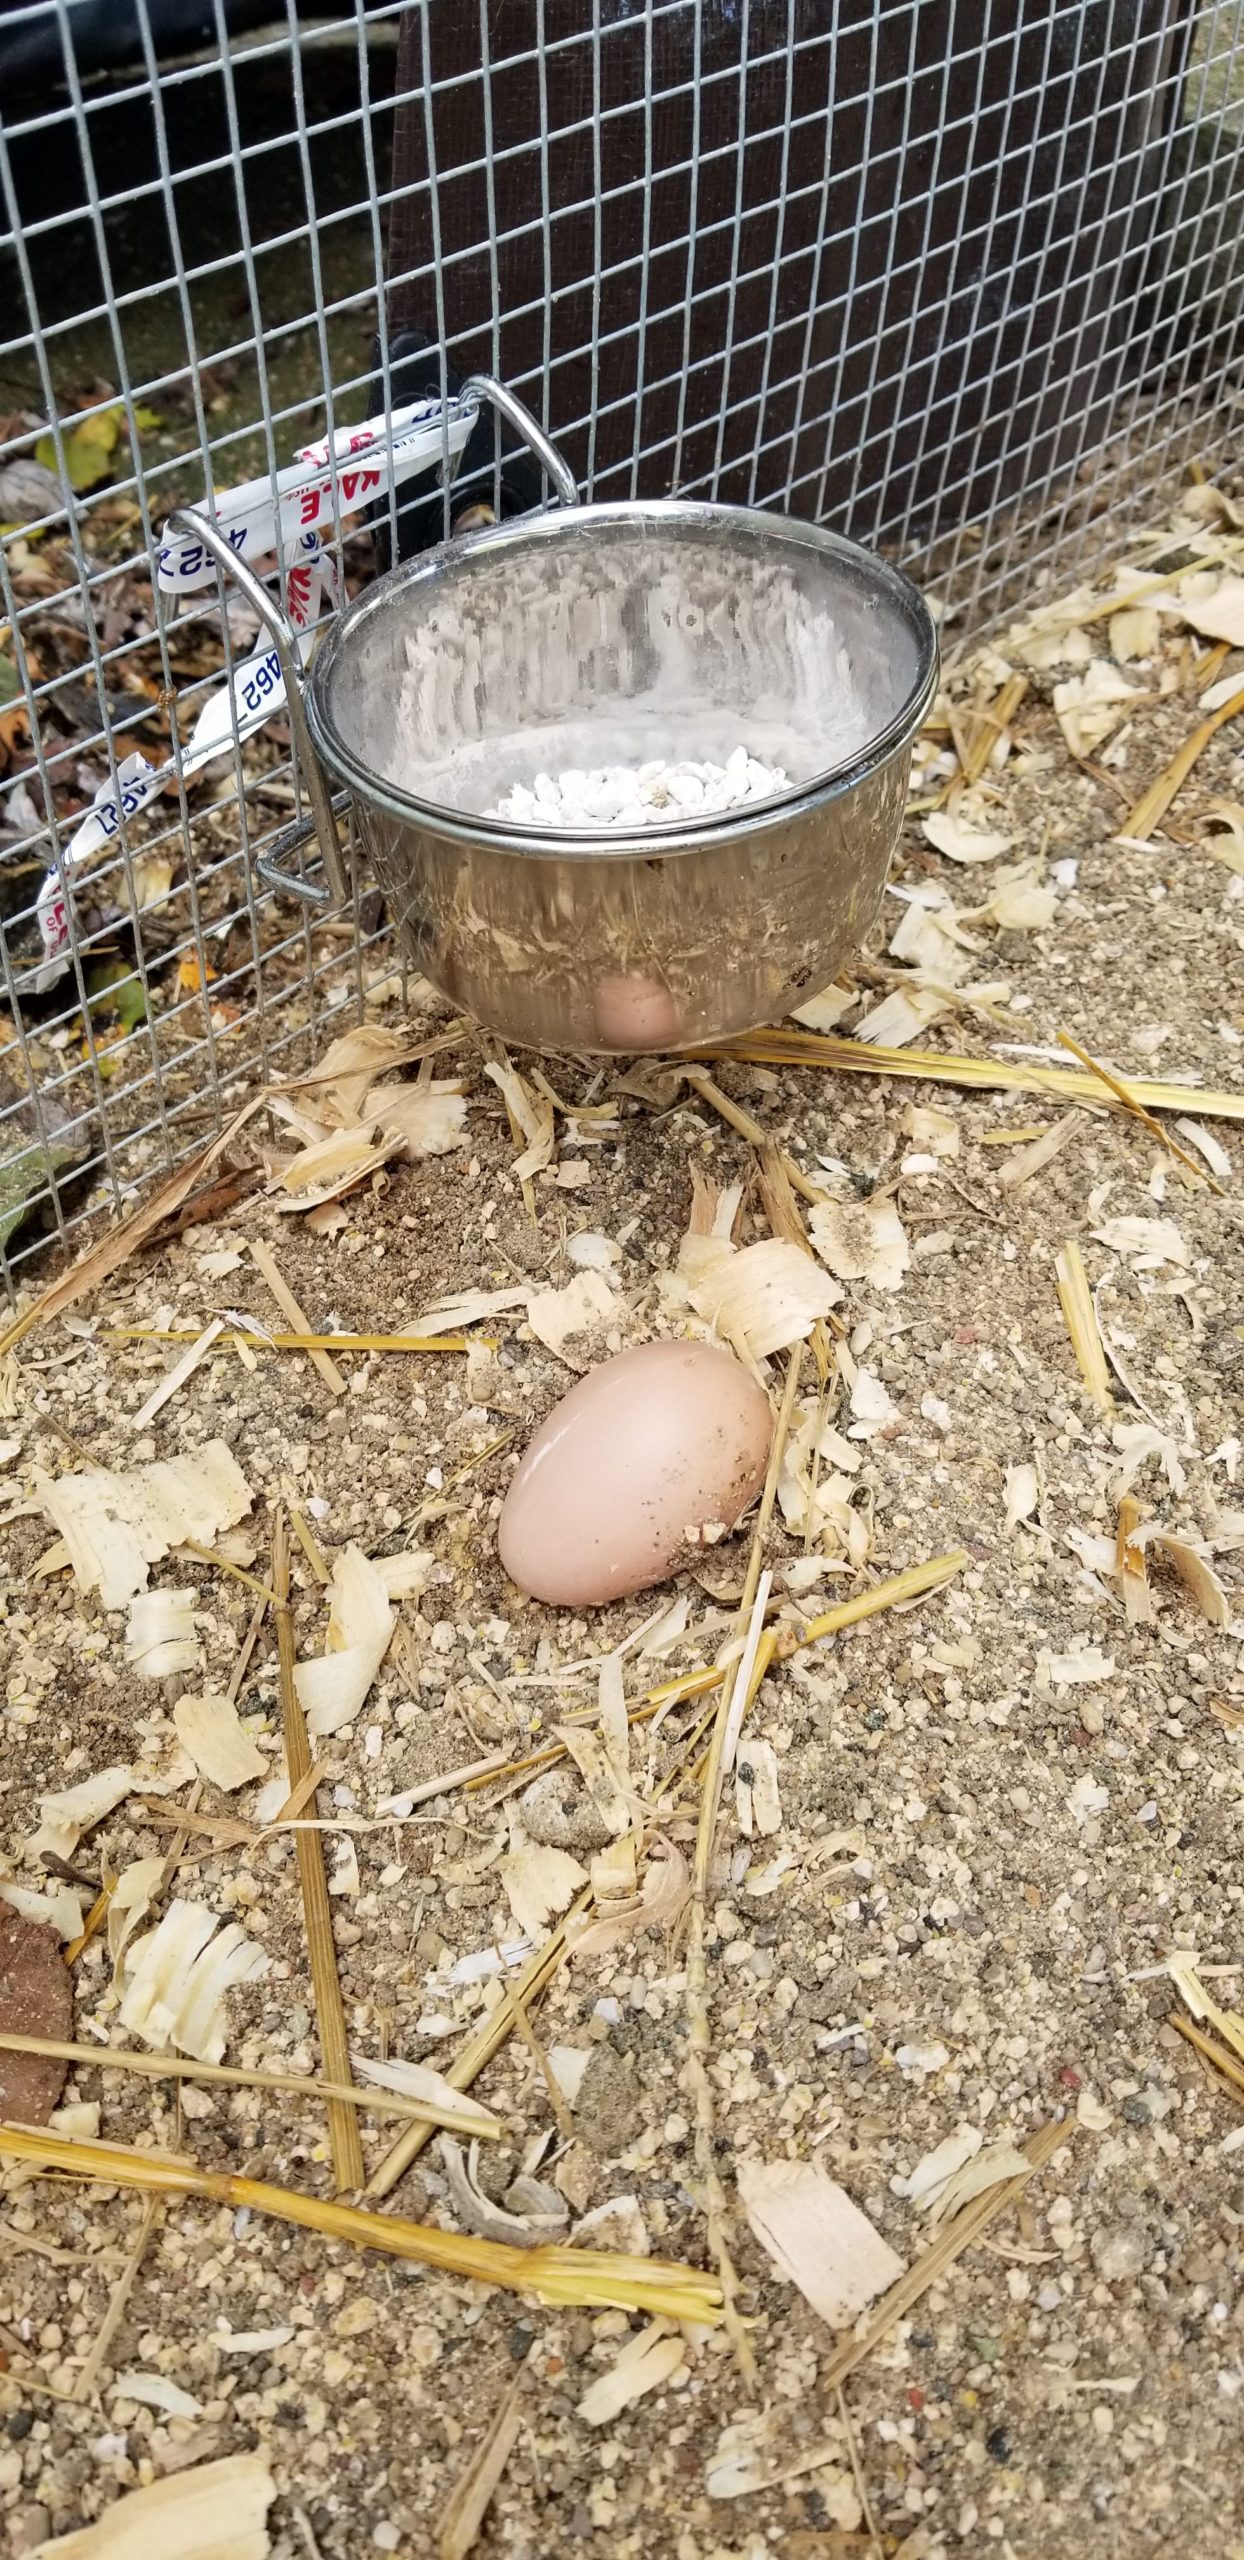 The first egg!